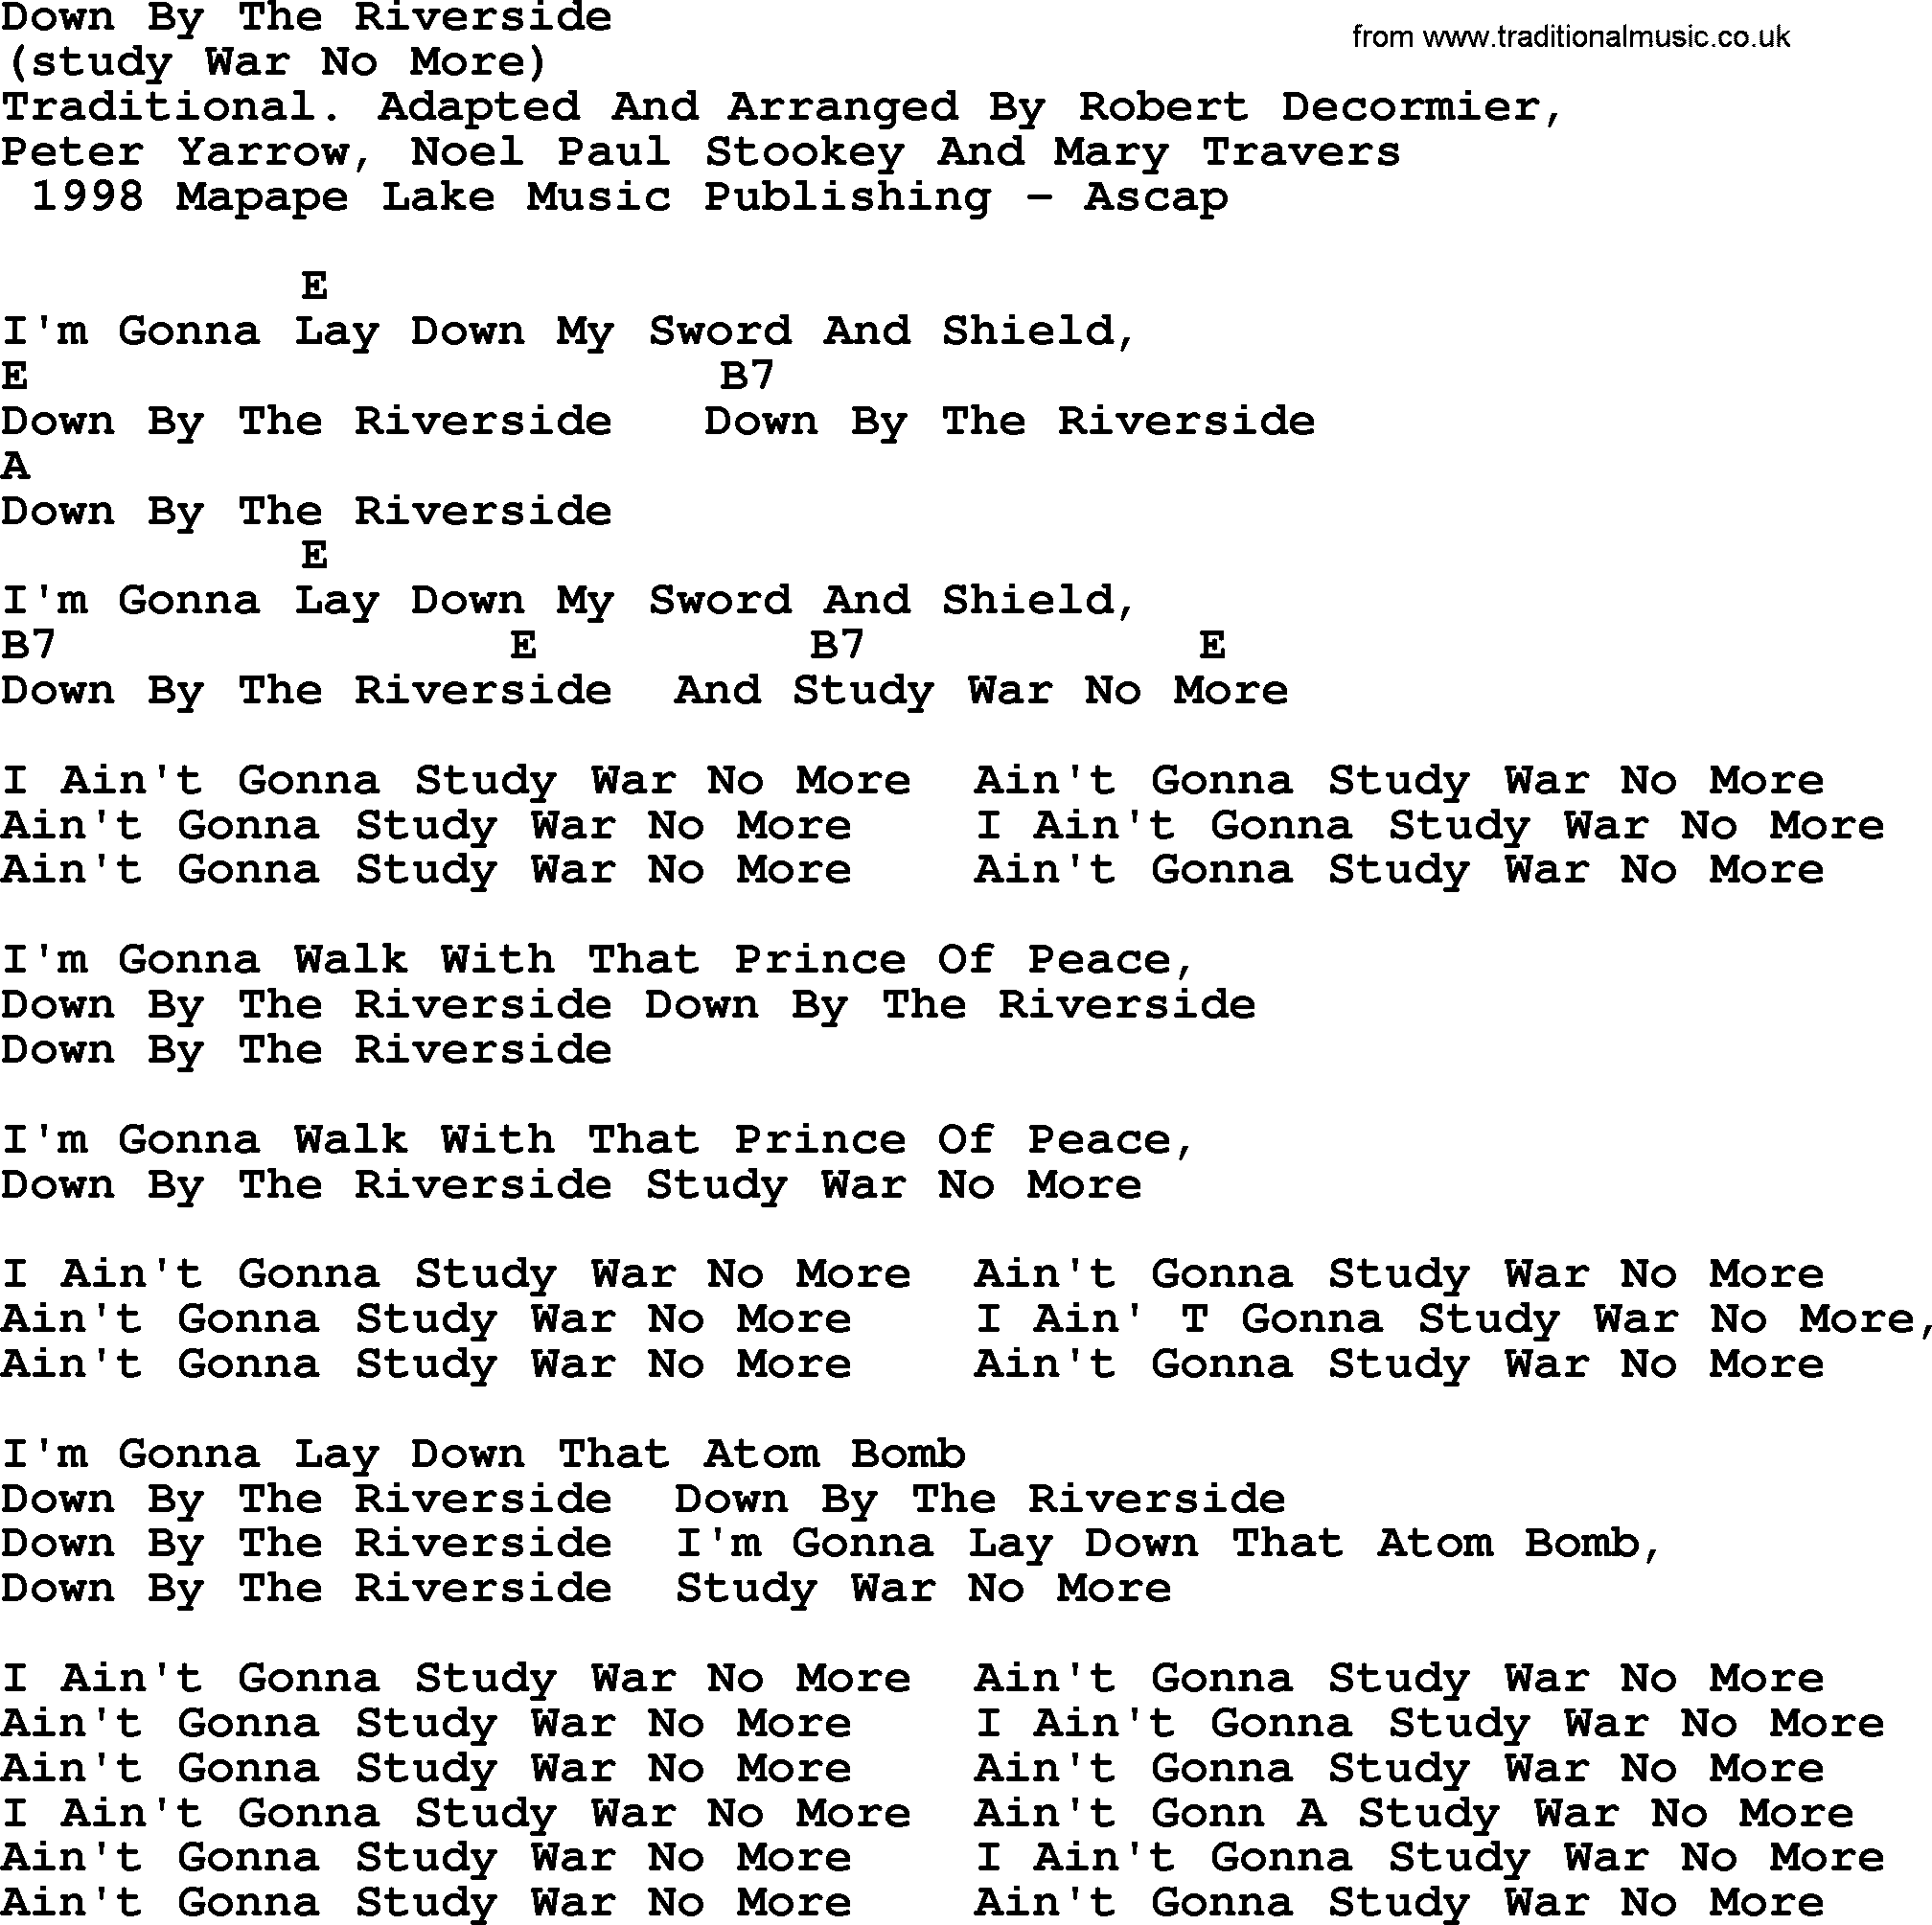 Peter, Paul and Mary song Down By The Riverside, lyrics and chords